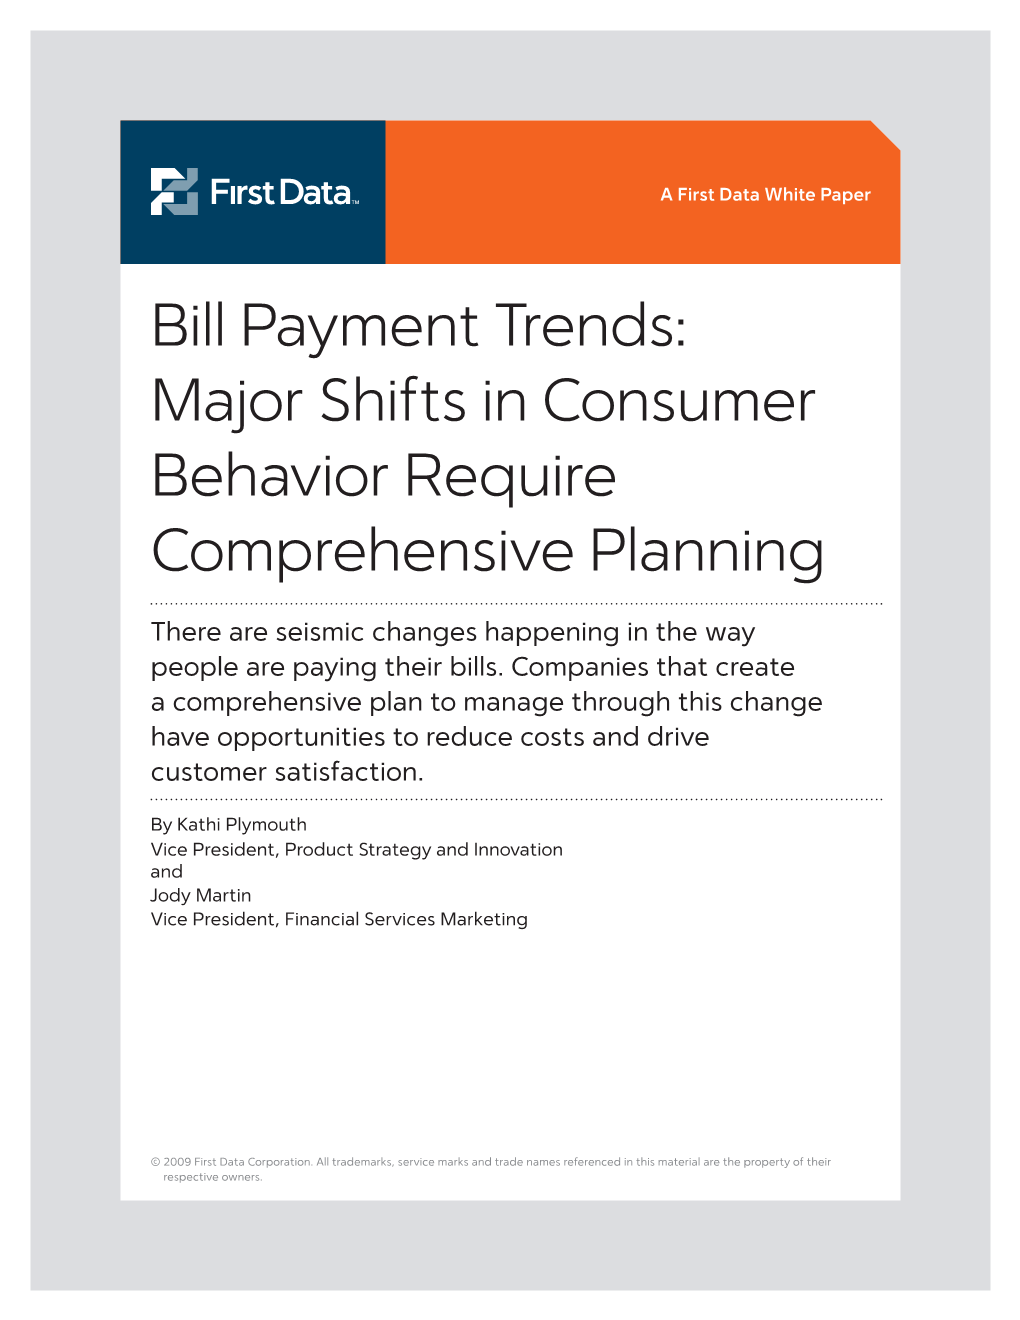 Bill Payment Trends: Major Shifts in Consumer Behavior Require Comprehensive Planning